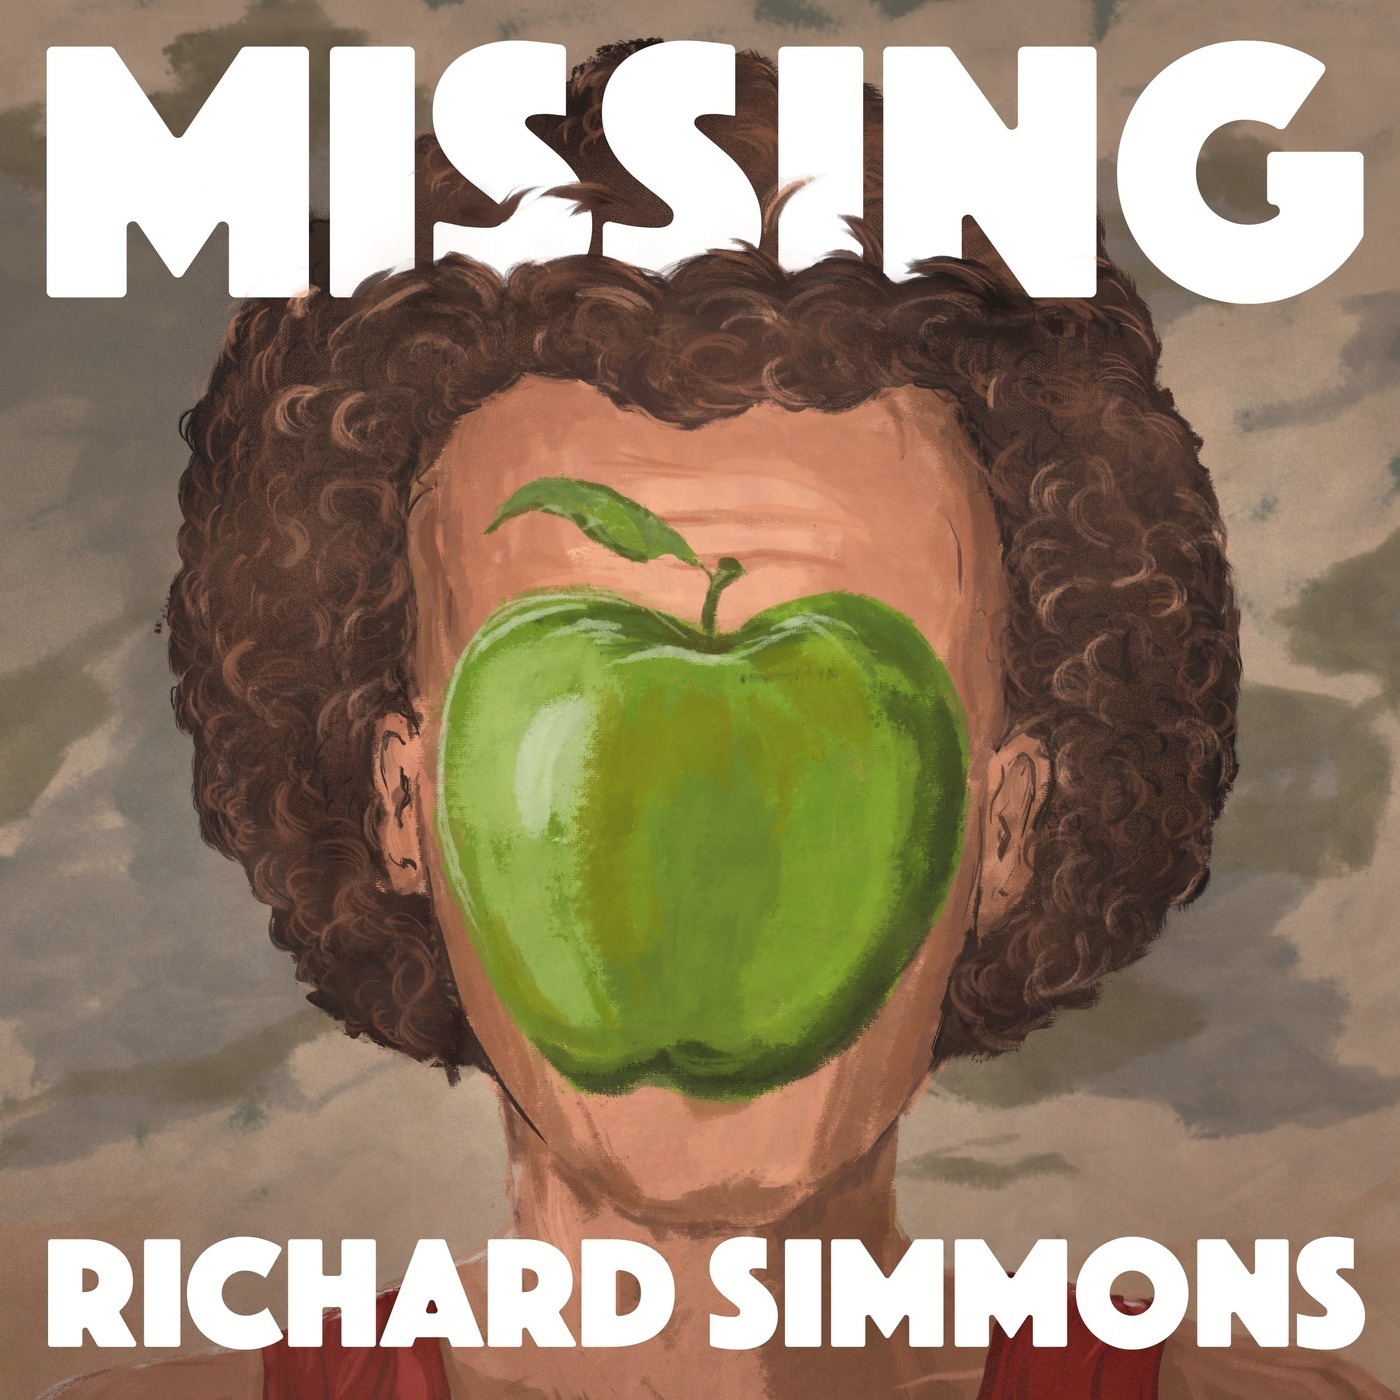 Headlong: Missing Richard Simmons podcast show image